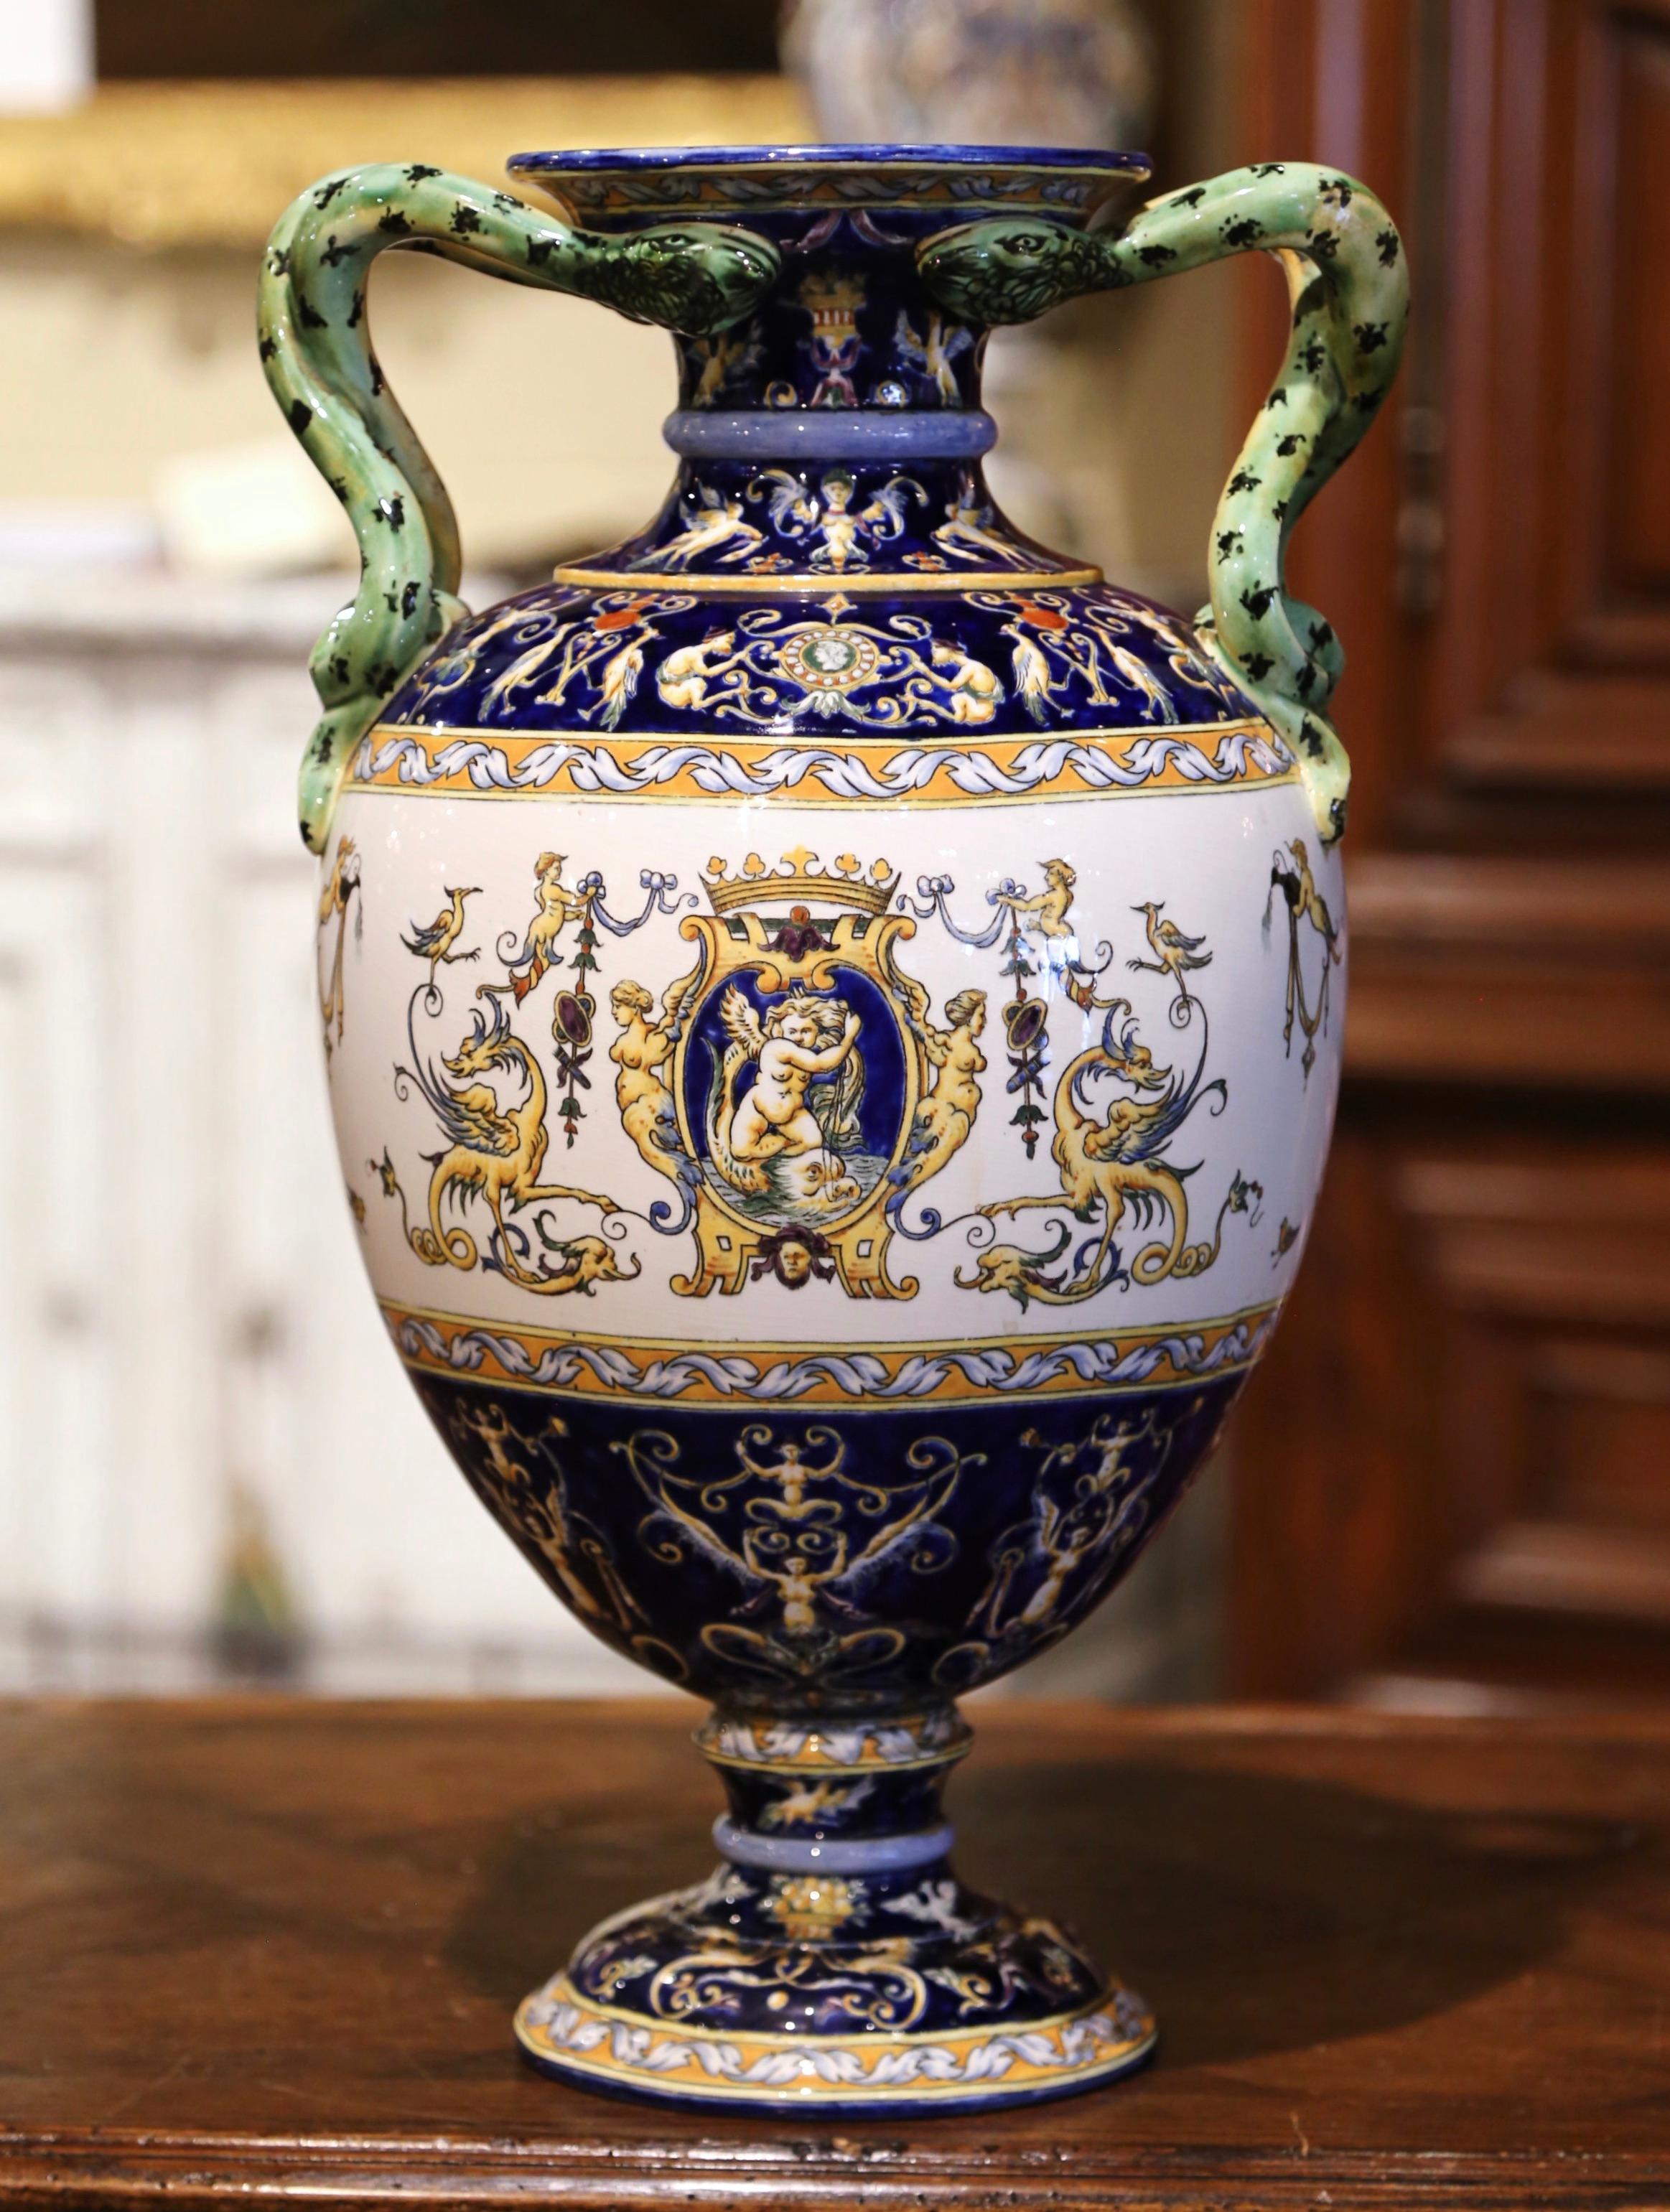 19th Century French Hand Painted Porcelain Vase with Snake Handles from Gien In Excellent Condition For Sale In Dallas, TX